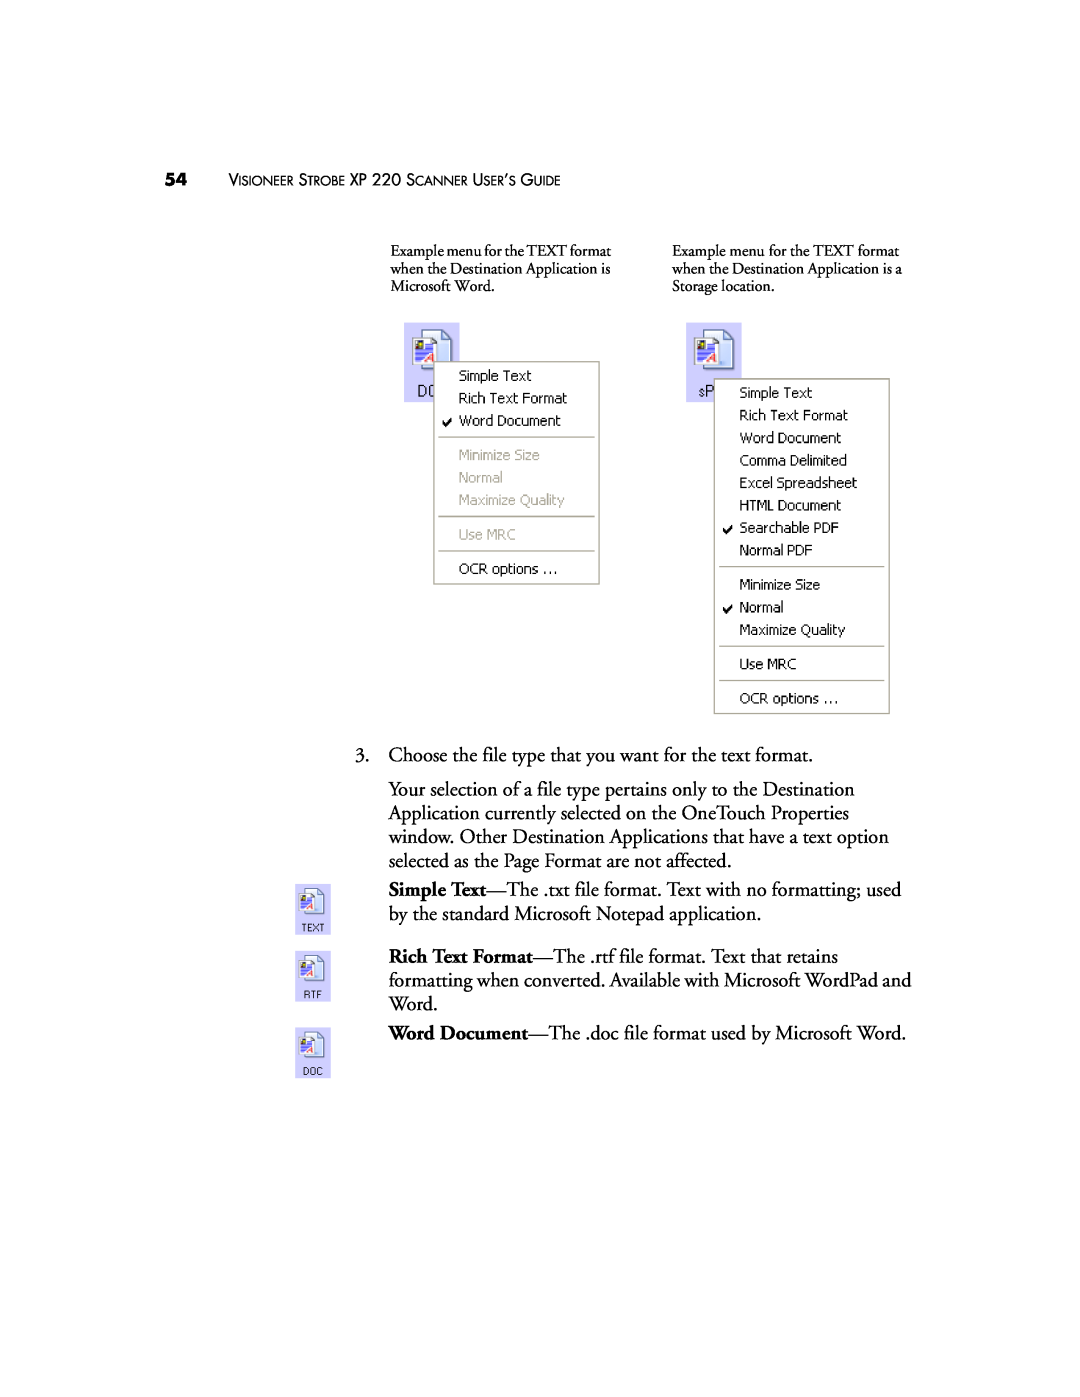 Visioneer XP220 manual Choose the file type that you want for the text format 